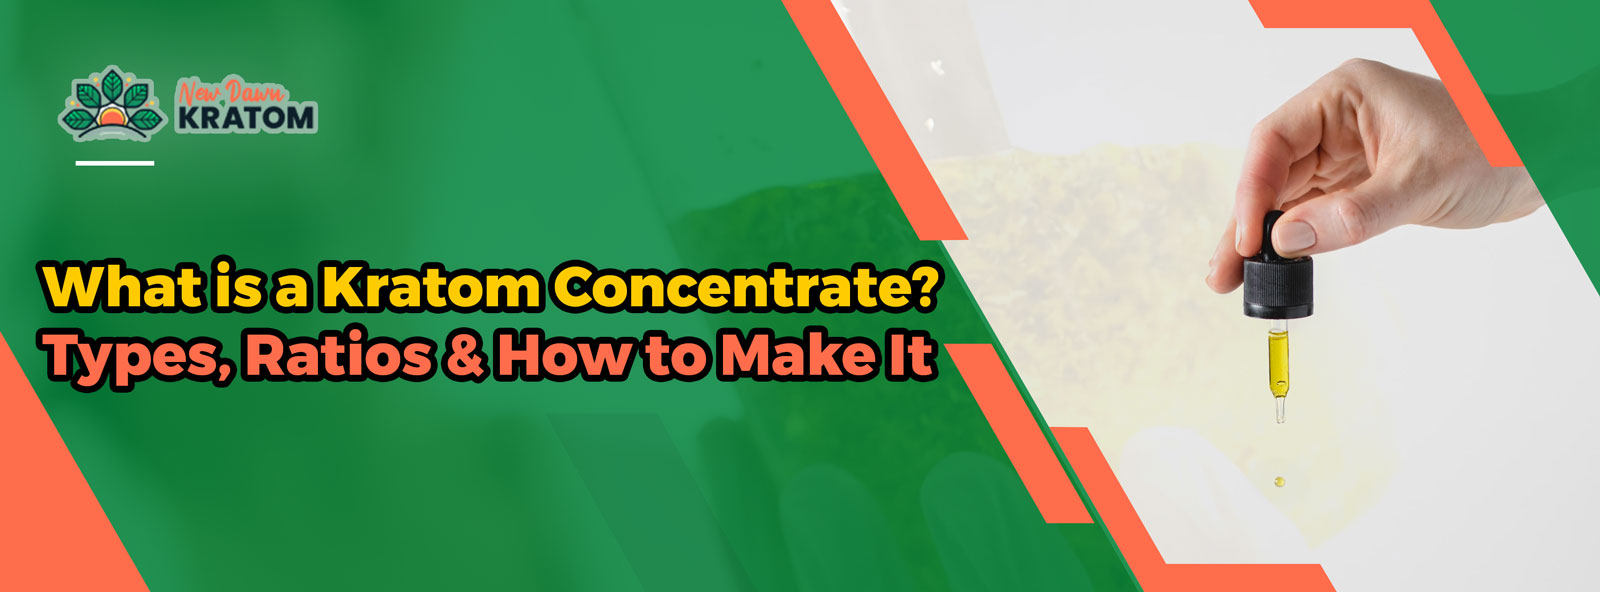 what is a kratom concentrate? types, ratios & how to make it